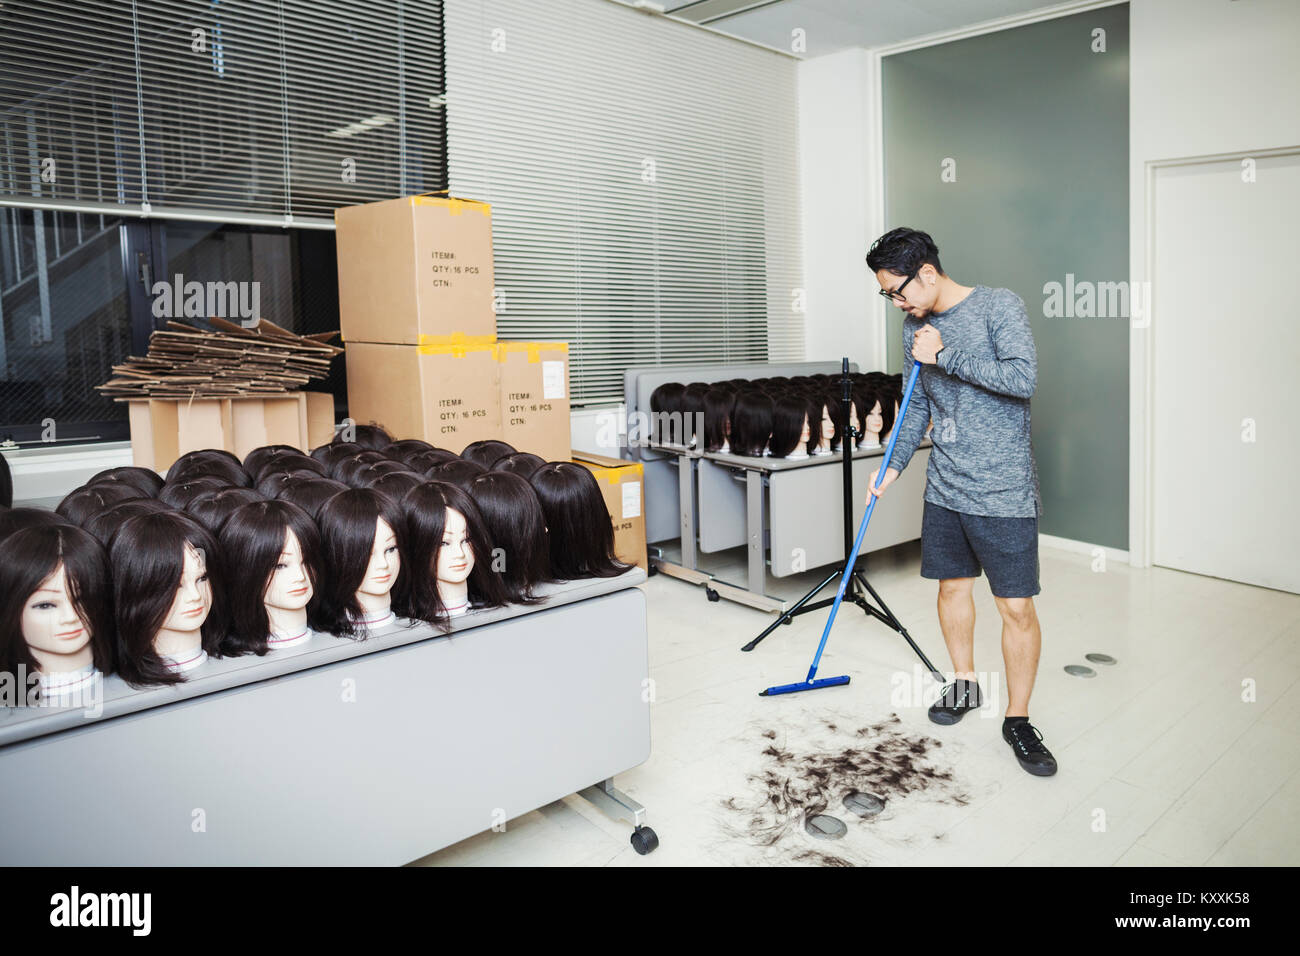 Bearded man wearing glasses standing indoors, sweeping hair on floor, large group of mannequin heads with brown wigs on tables. Stock Photo